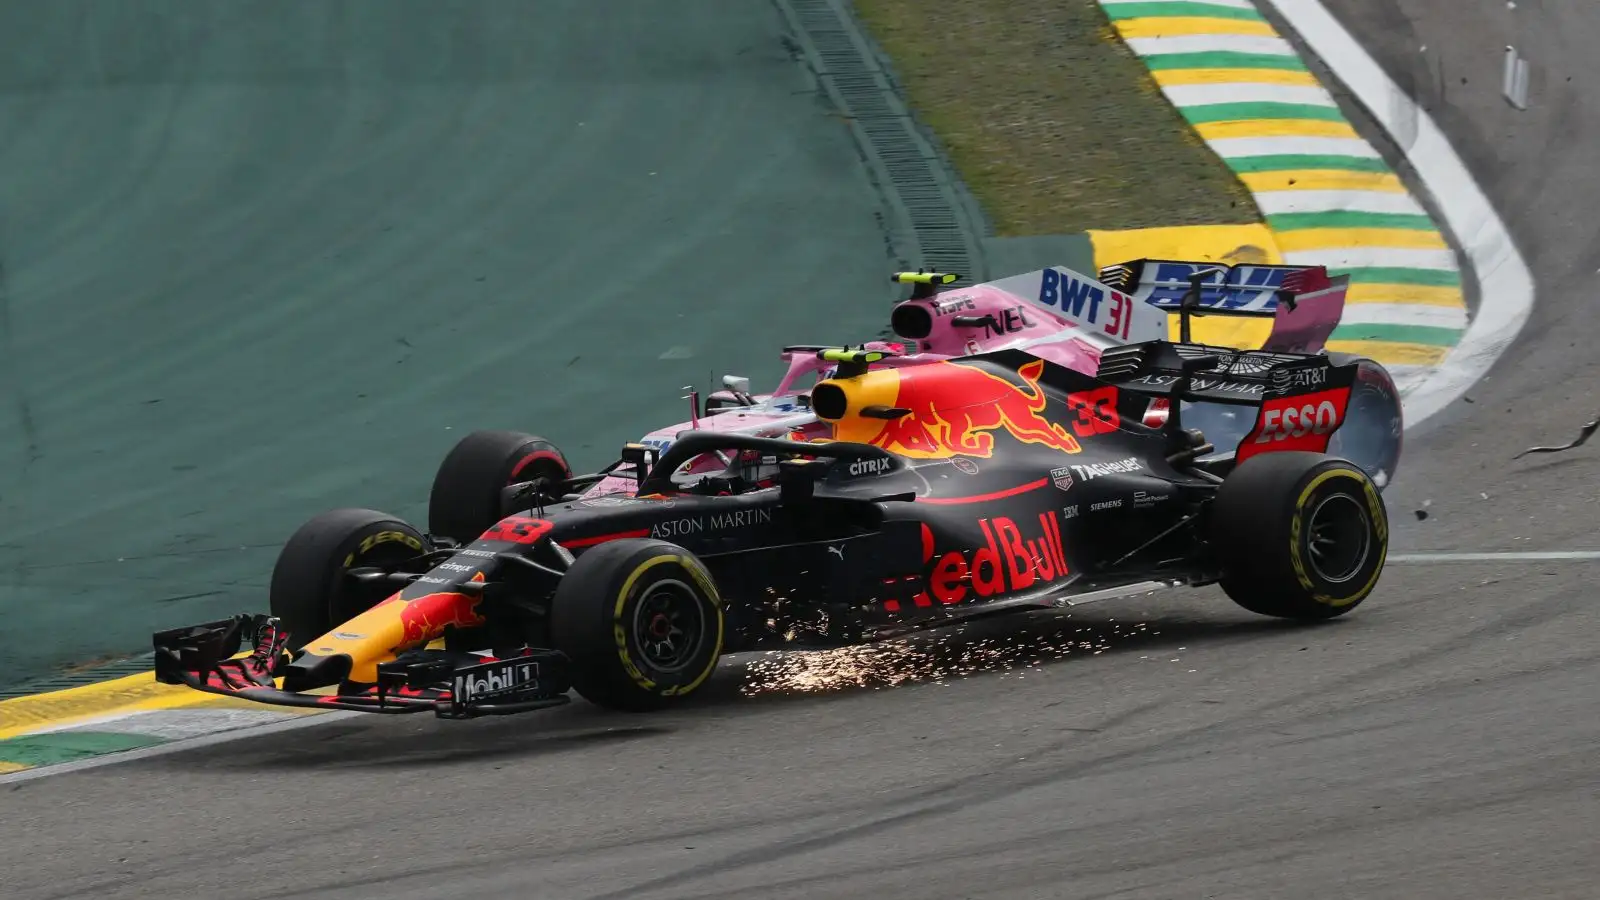 Max Verstappen (Red Bull) collides with Esteban Ocon (Racing Point Force India) in an infamous Brazilian Grand Prix moment. Sao Paulo, November 2018.